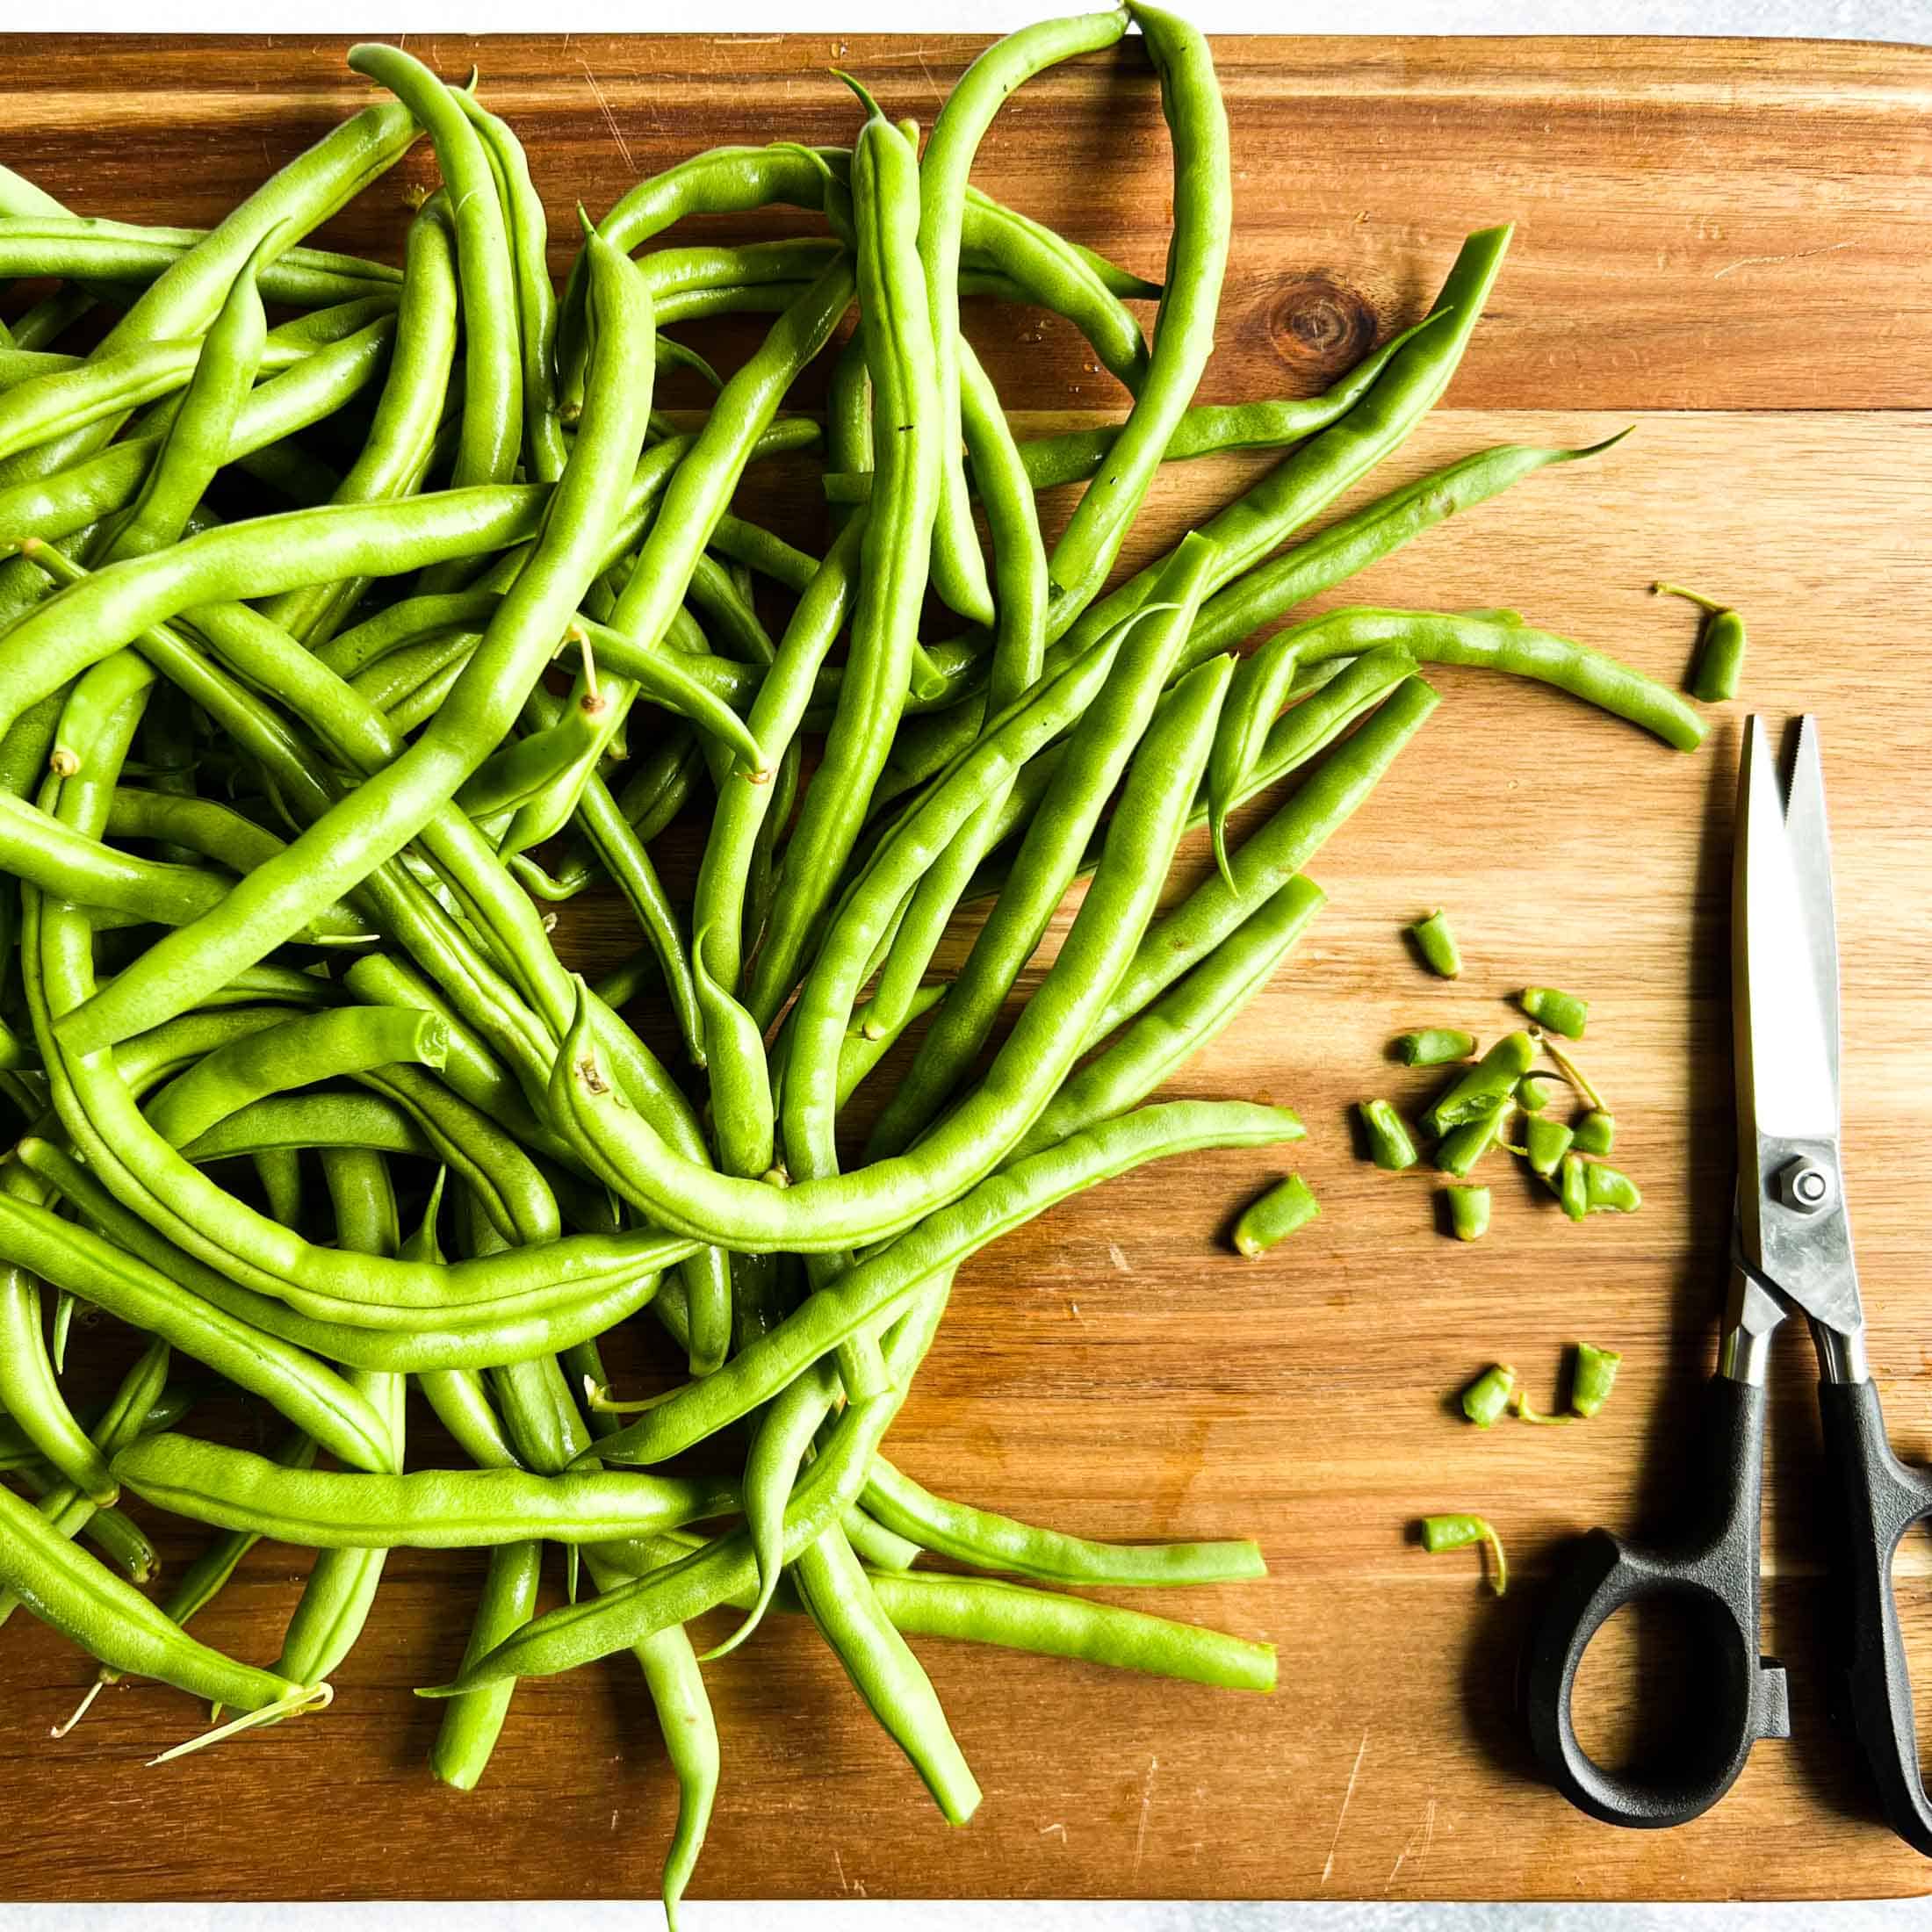 Green beans on a wooden cutting board with kitchen shears beside and little pieces of cut tops.